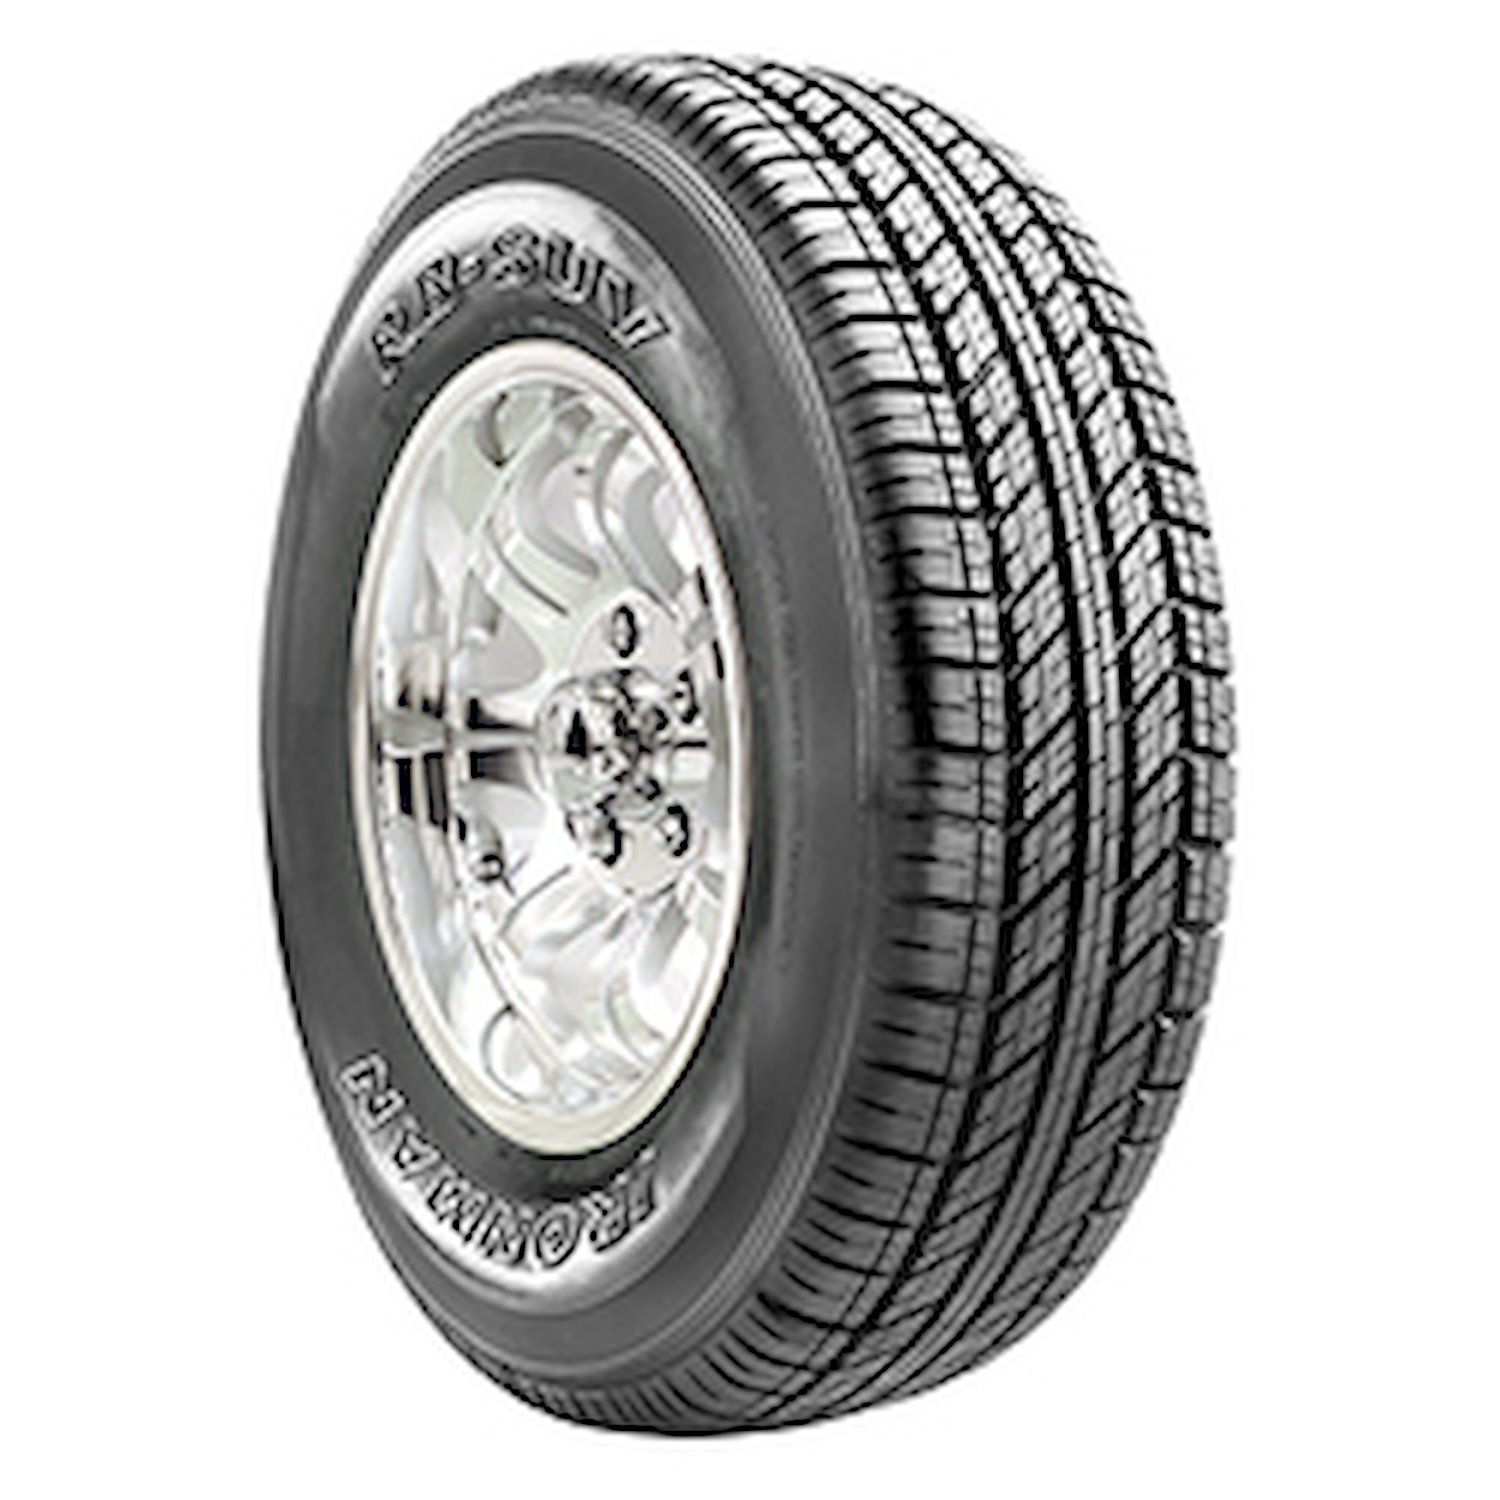 RB SUV Tire, 235/65R17 104H